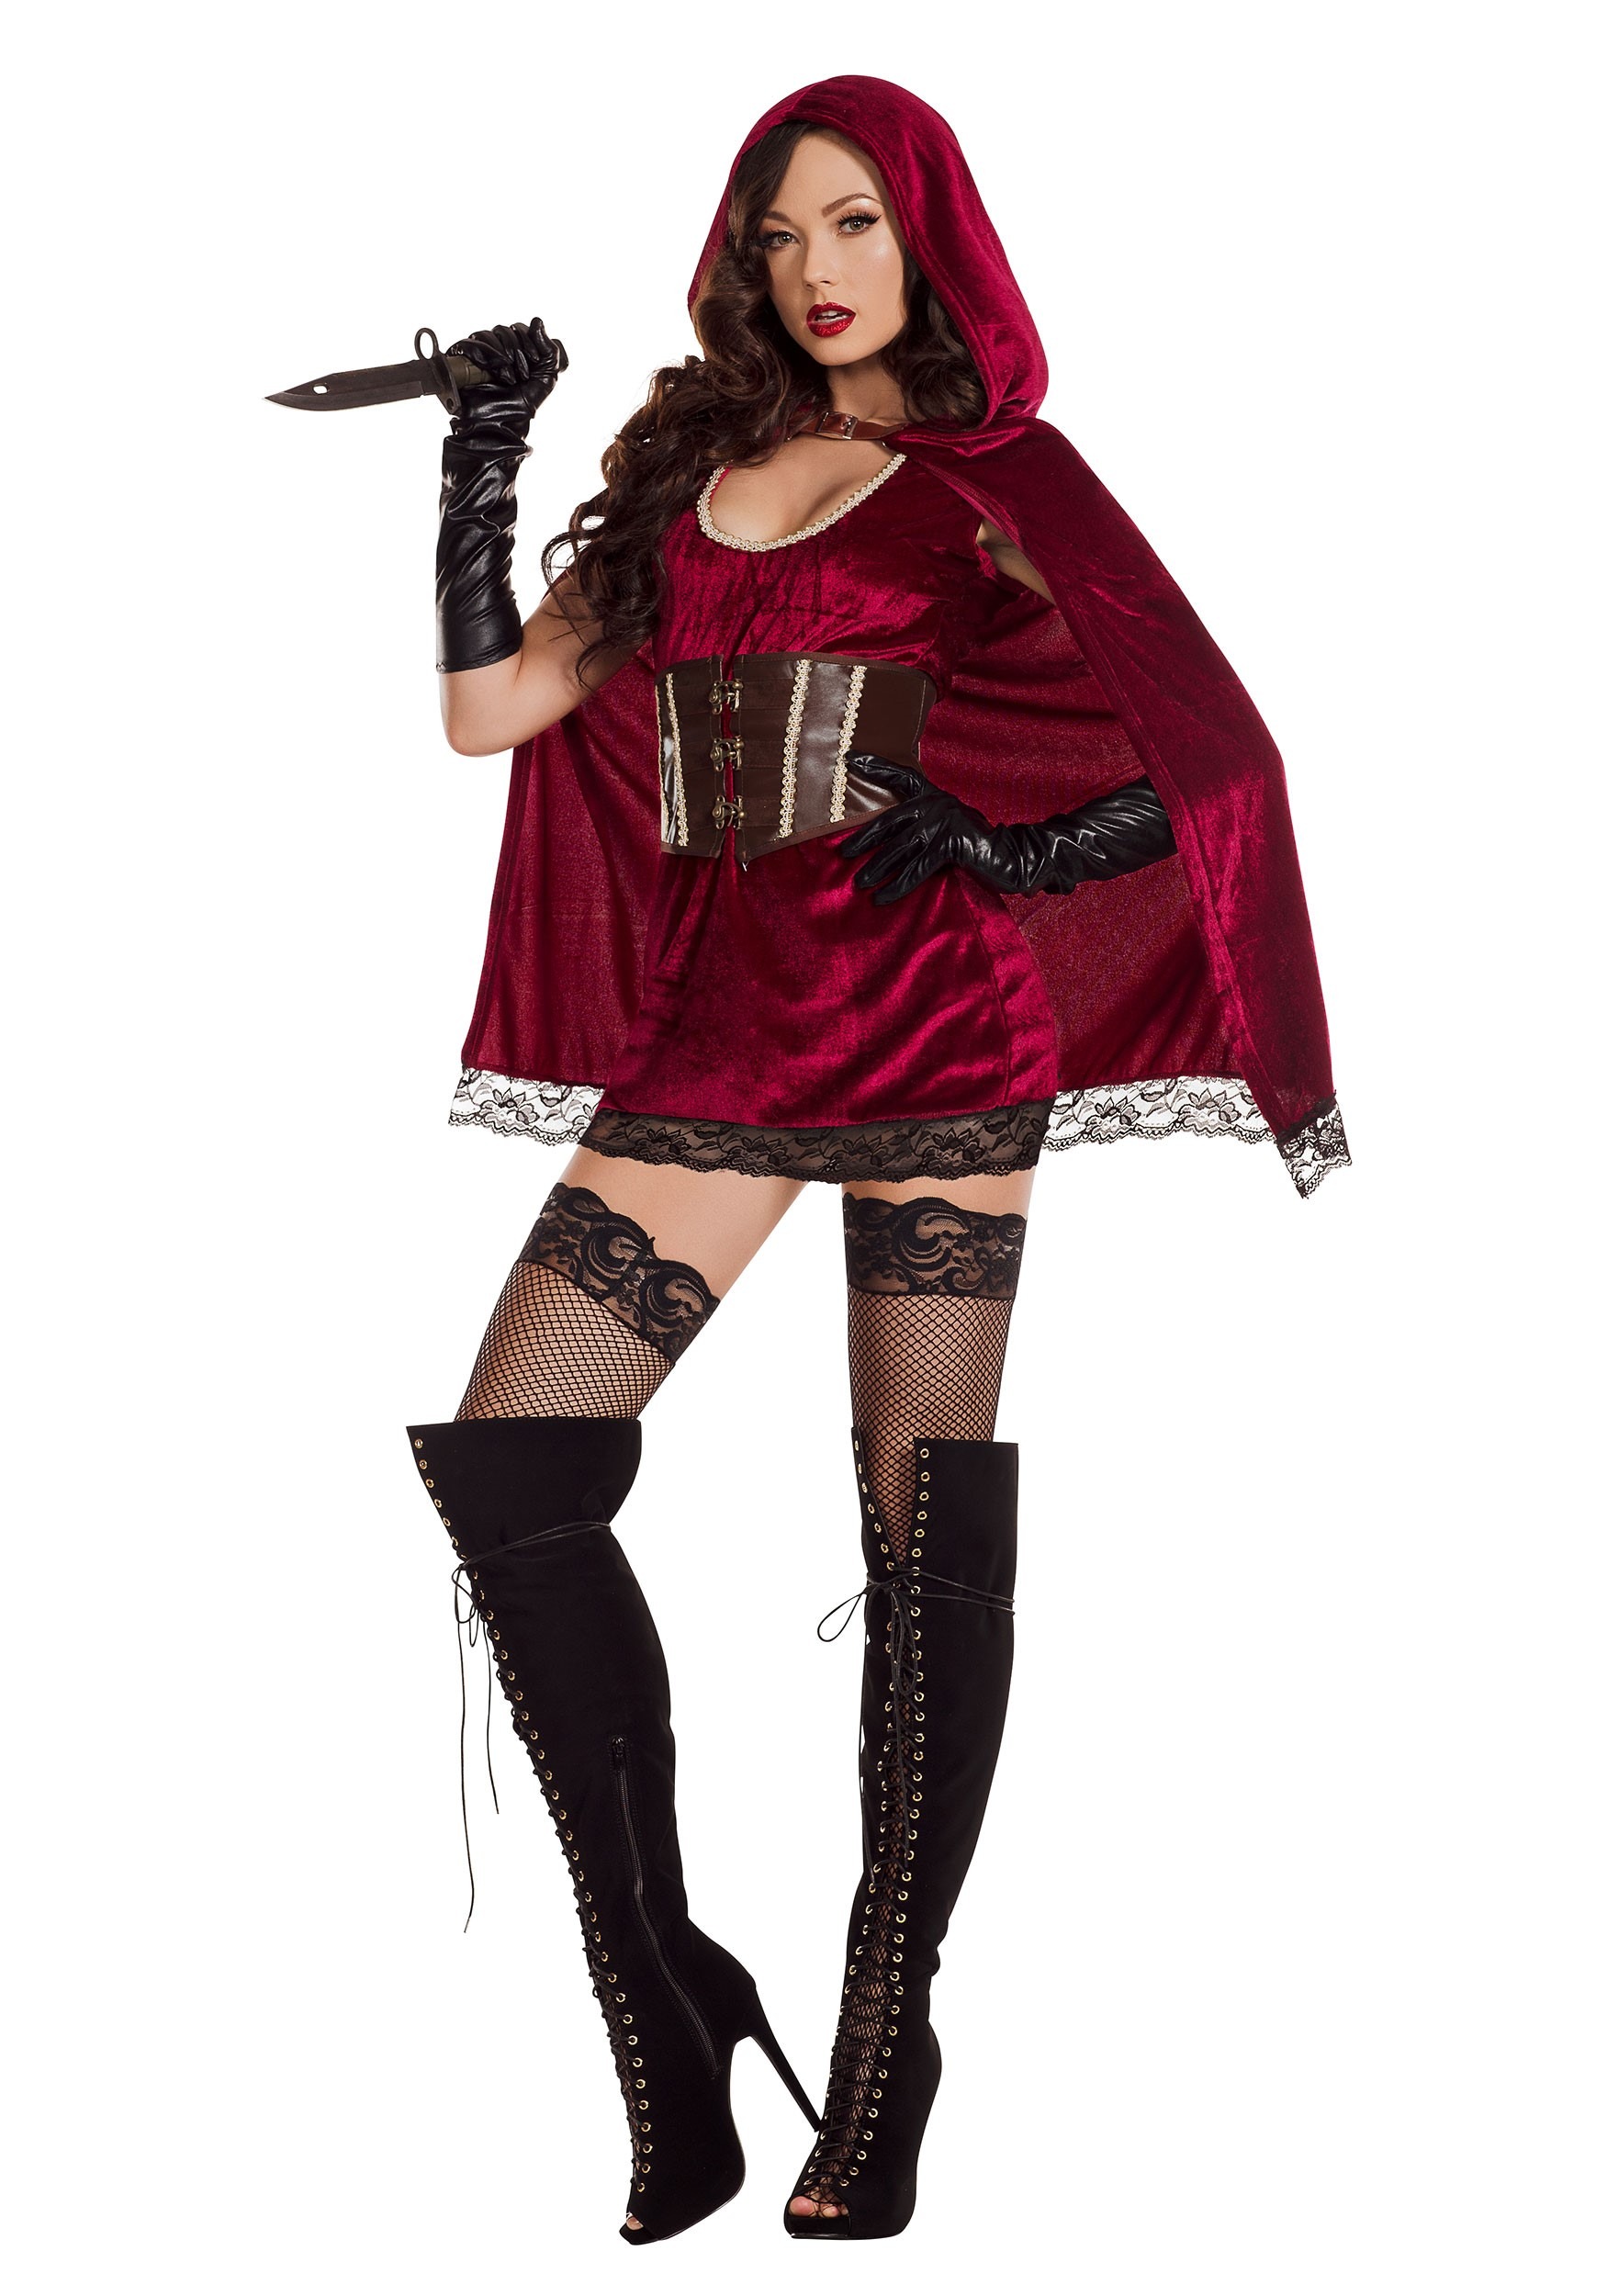 Sexy Red Riding Hood Women’s Costume